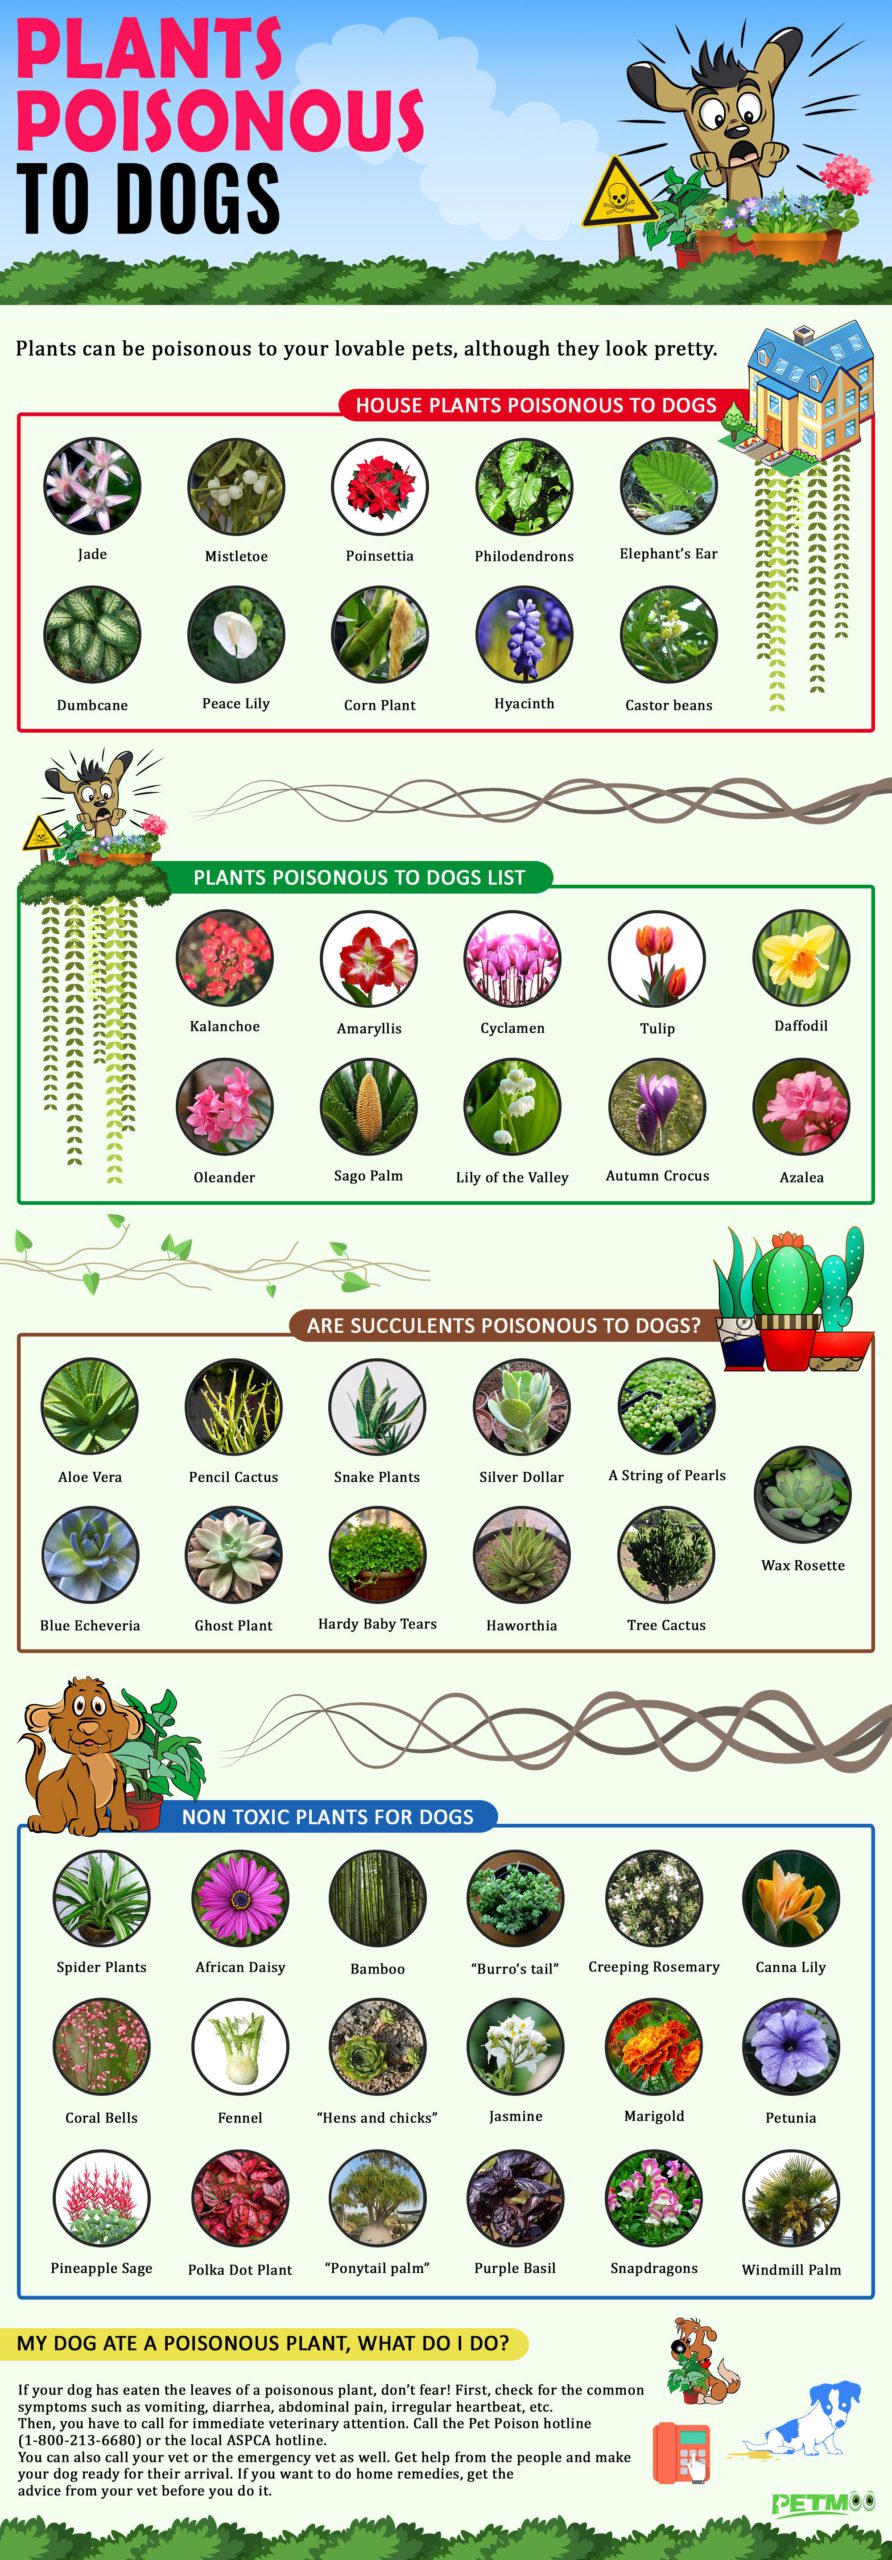 Plants Poisonous To Dogs And Plants Non Toxic To Dogs - Petmoo